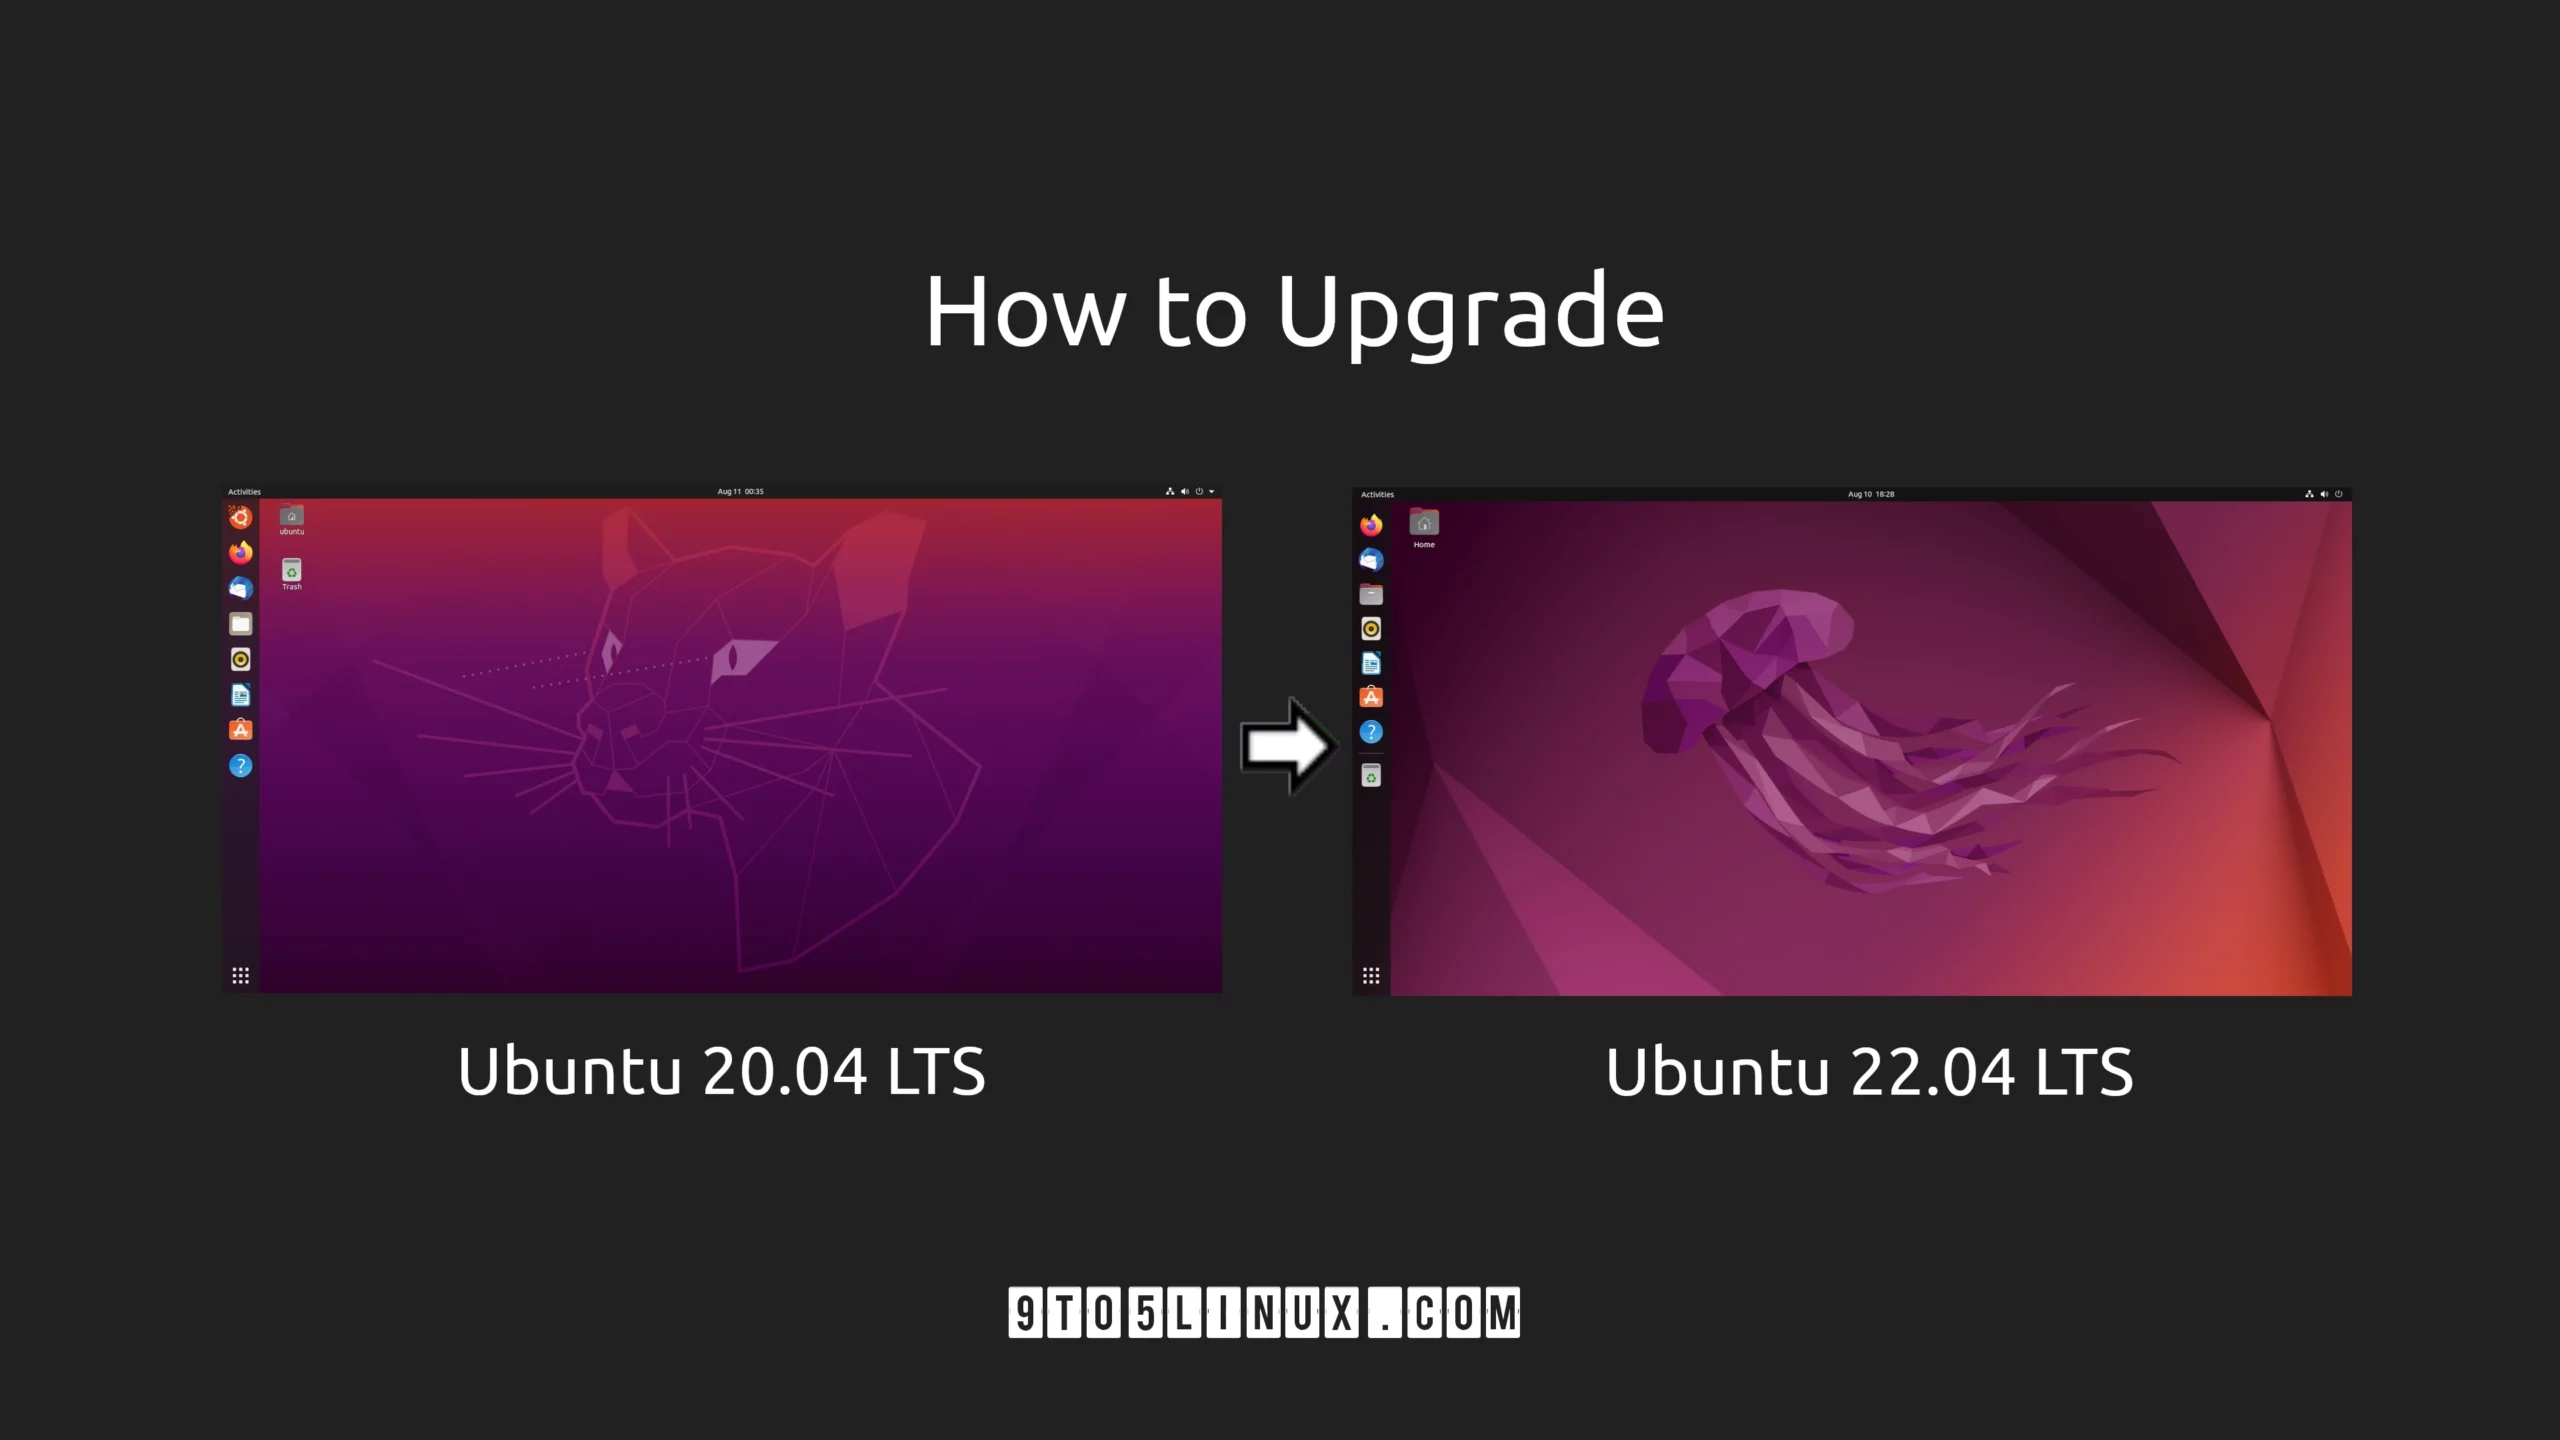 Ubuntu 20.04 LTS Users Can Now Finally Upgrade to Ubuntu 22.04 LTS, Here’s How